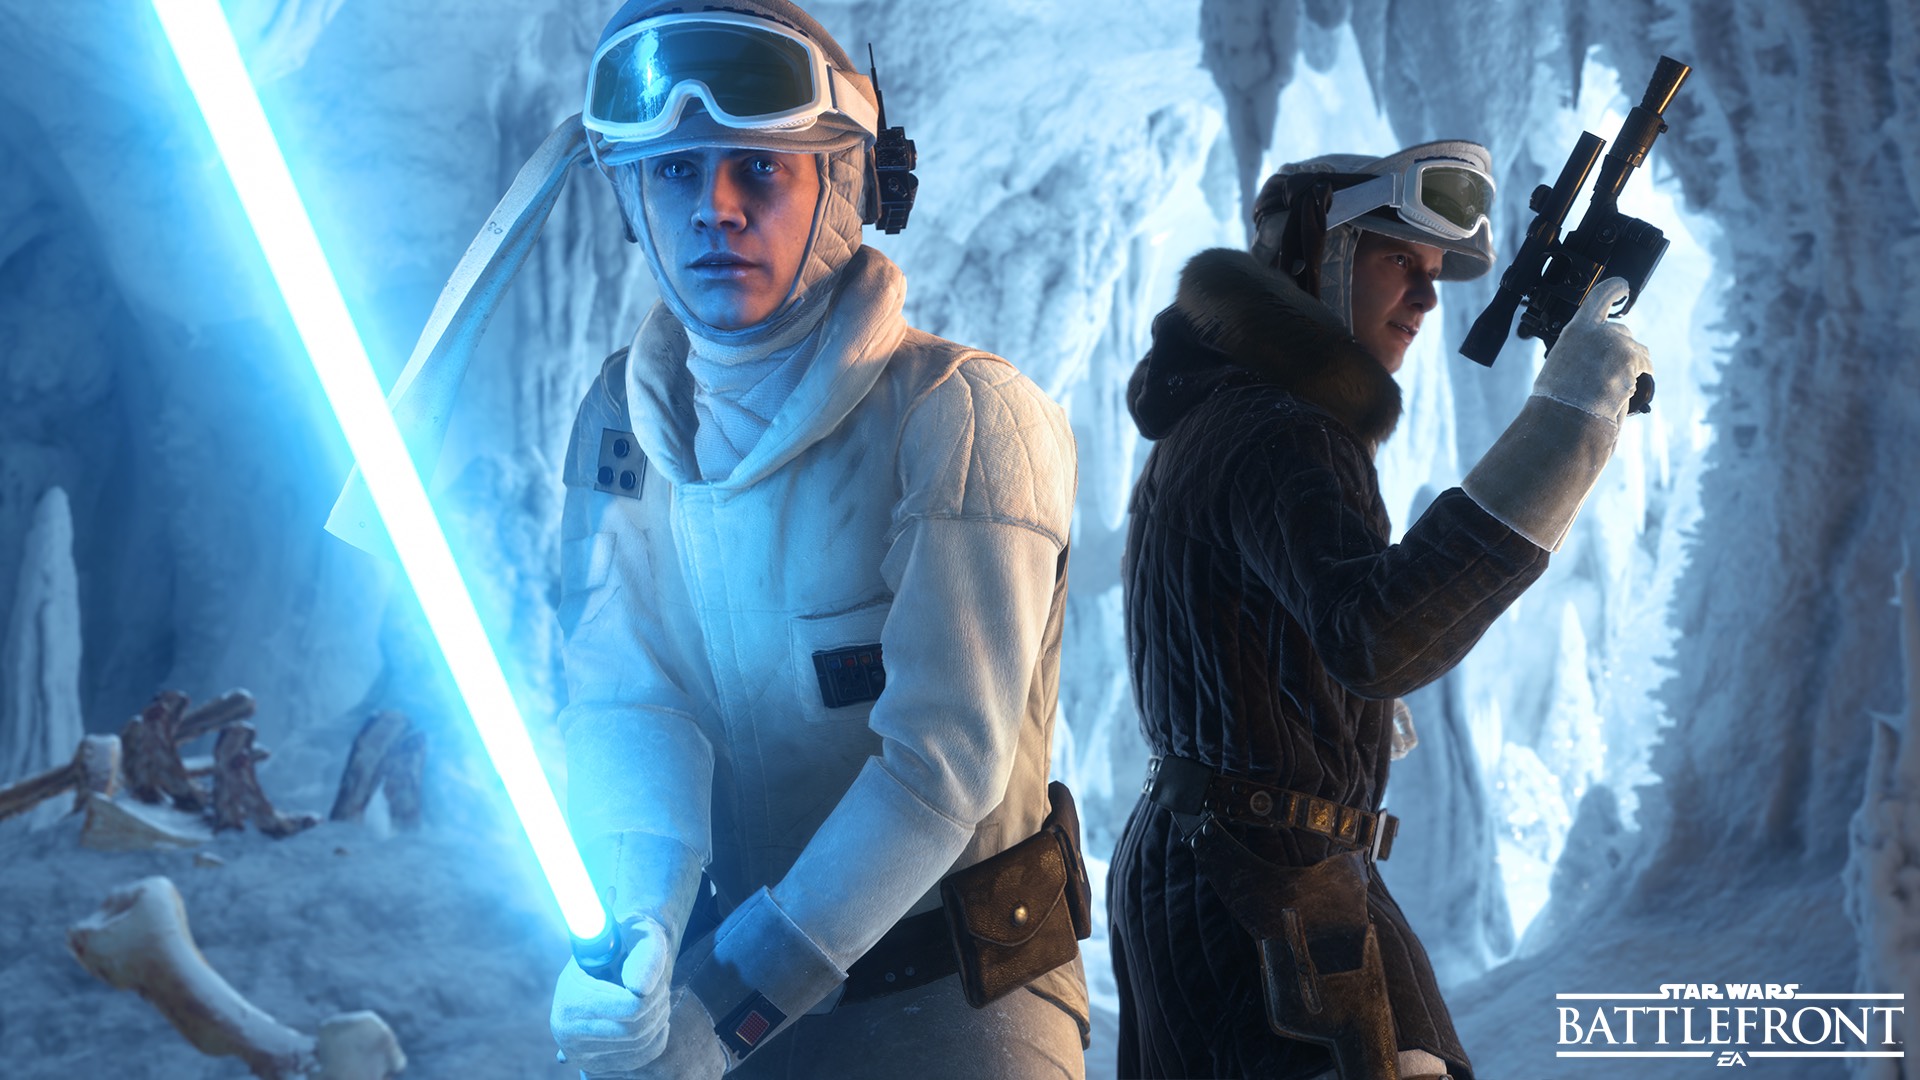 “Star Wars Battlefront” Season Pass Detailed - Just an Outline, Not Outright Stated